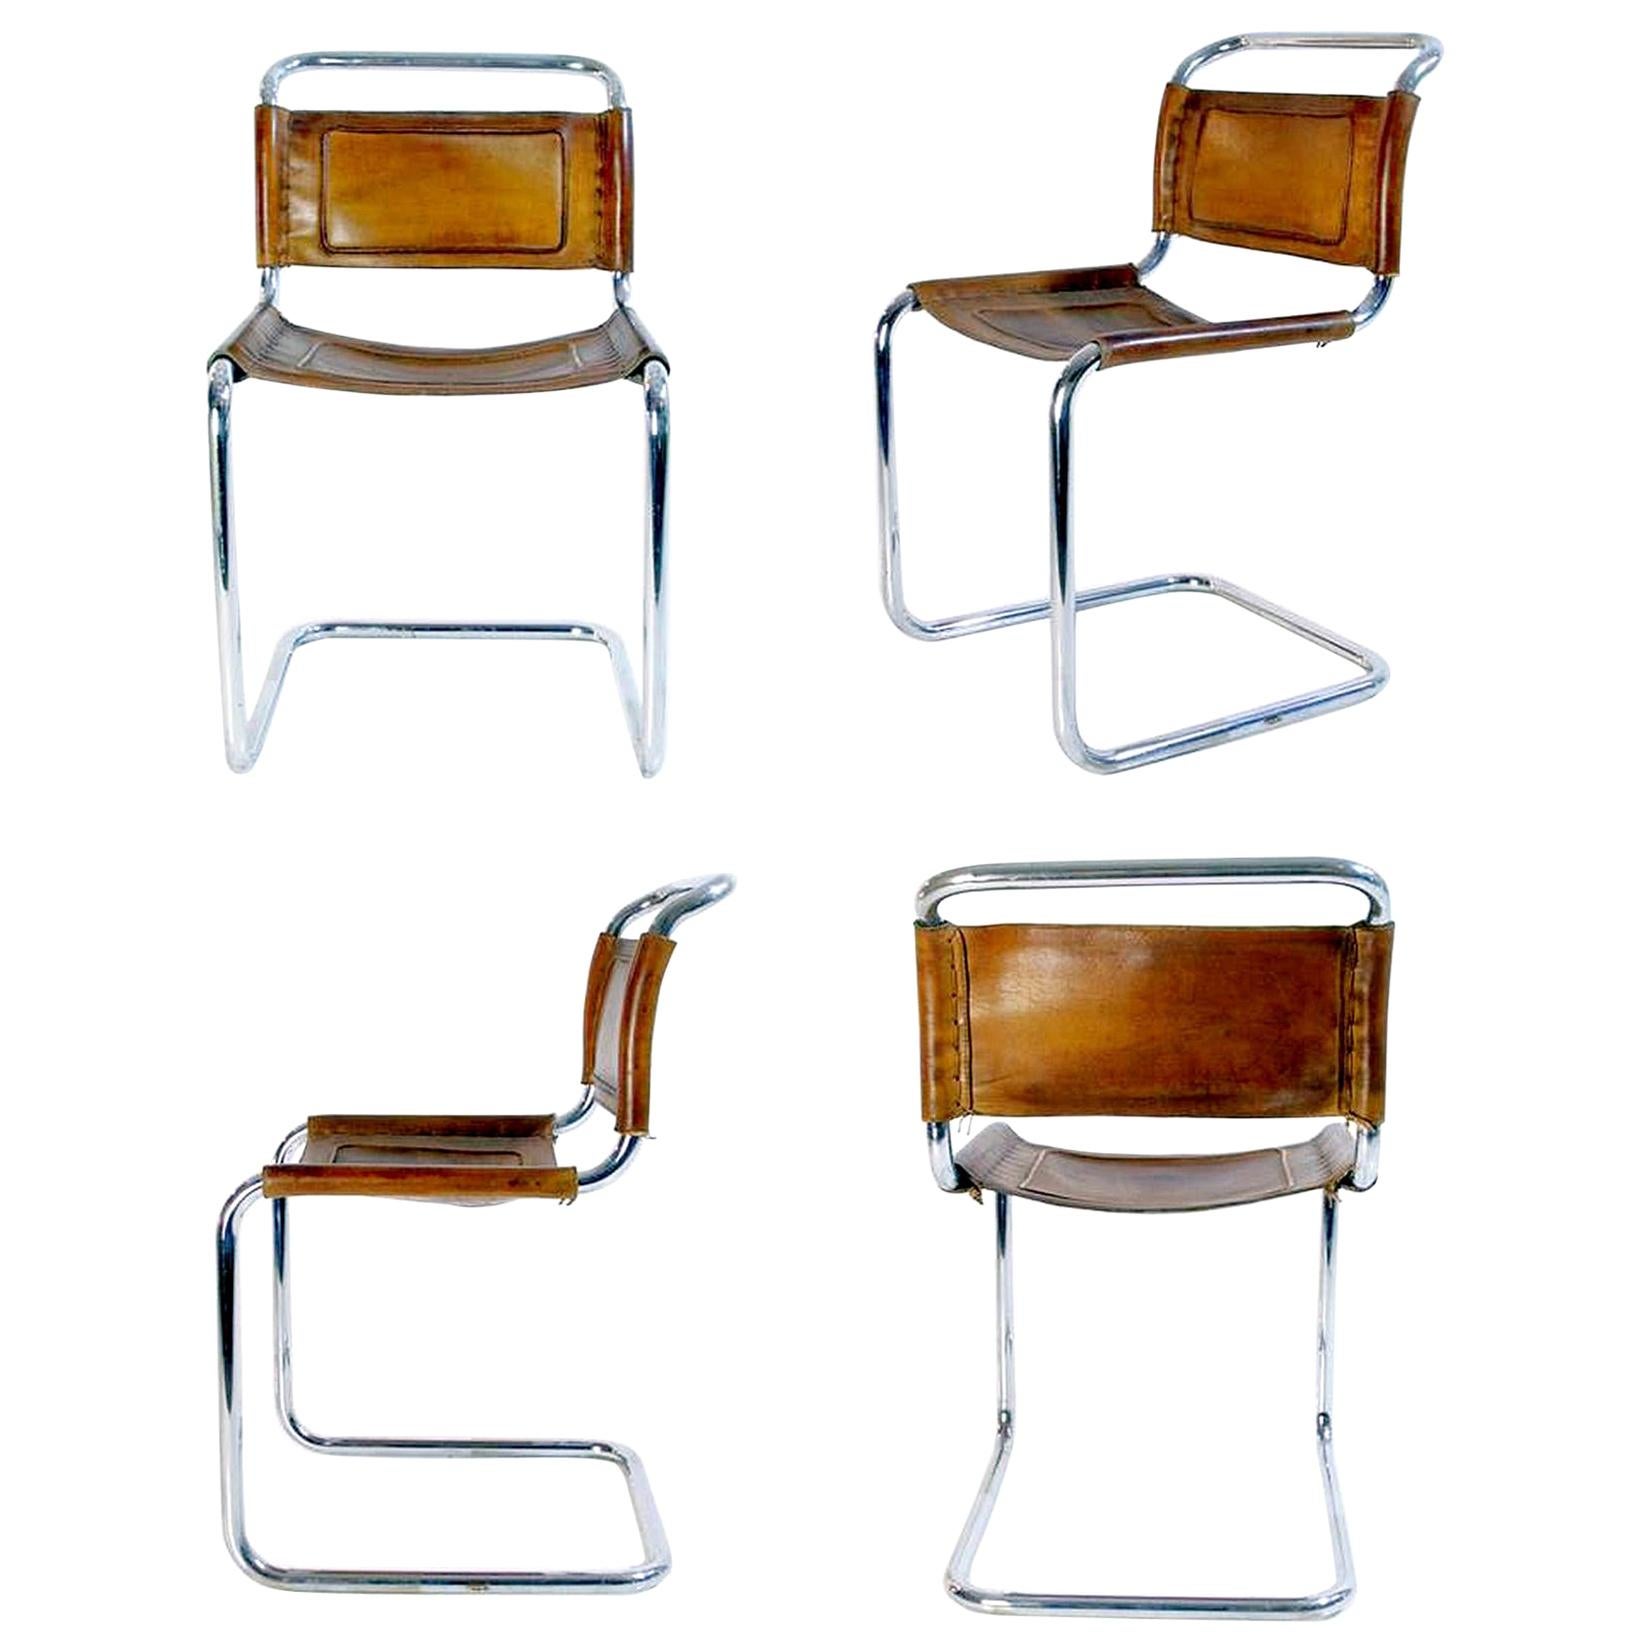 A set of four Italian dining chairs in Bauhaus style with a chrome structure with seat and back in cognac brown leather. In great vintage condition on the chrome as well as the leather. The chairs are also very comfortable to sit on for long dinner